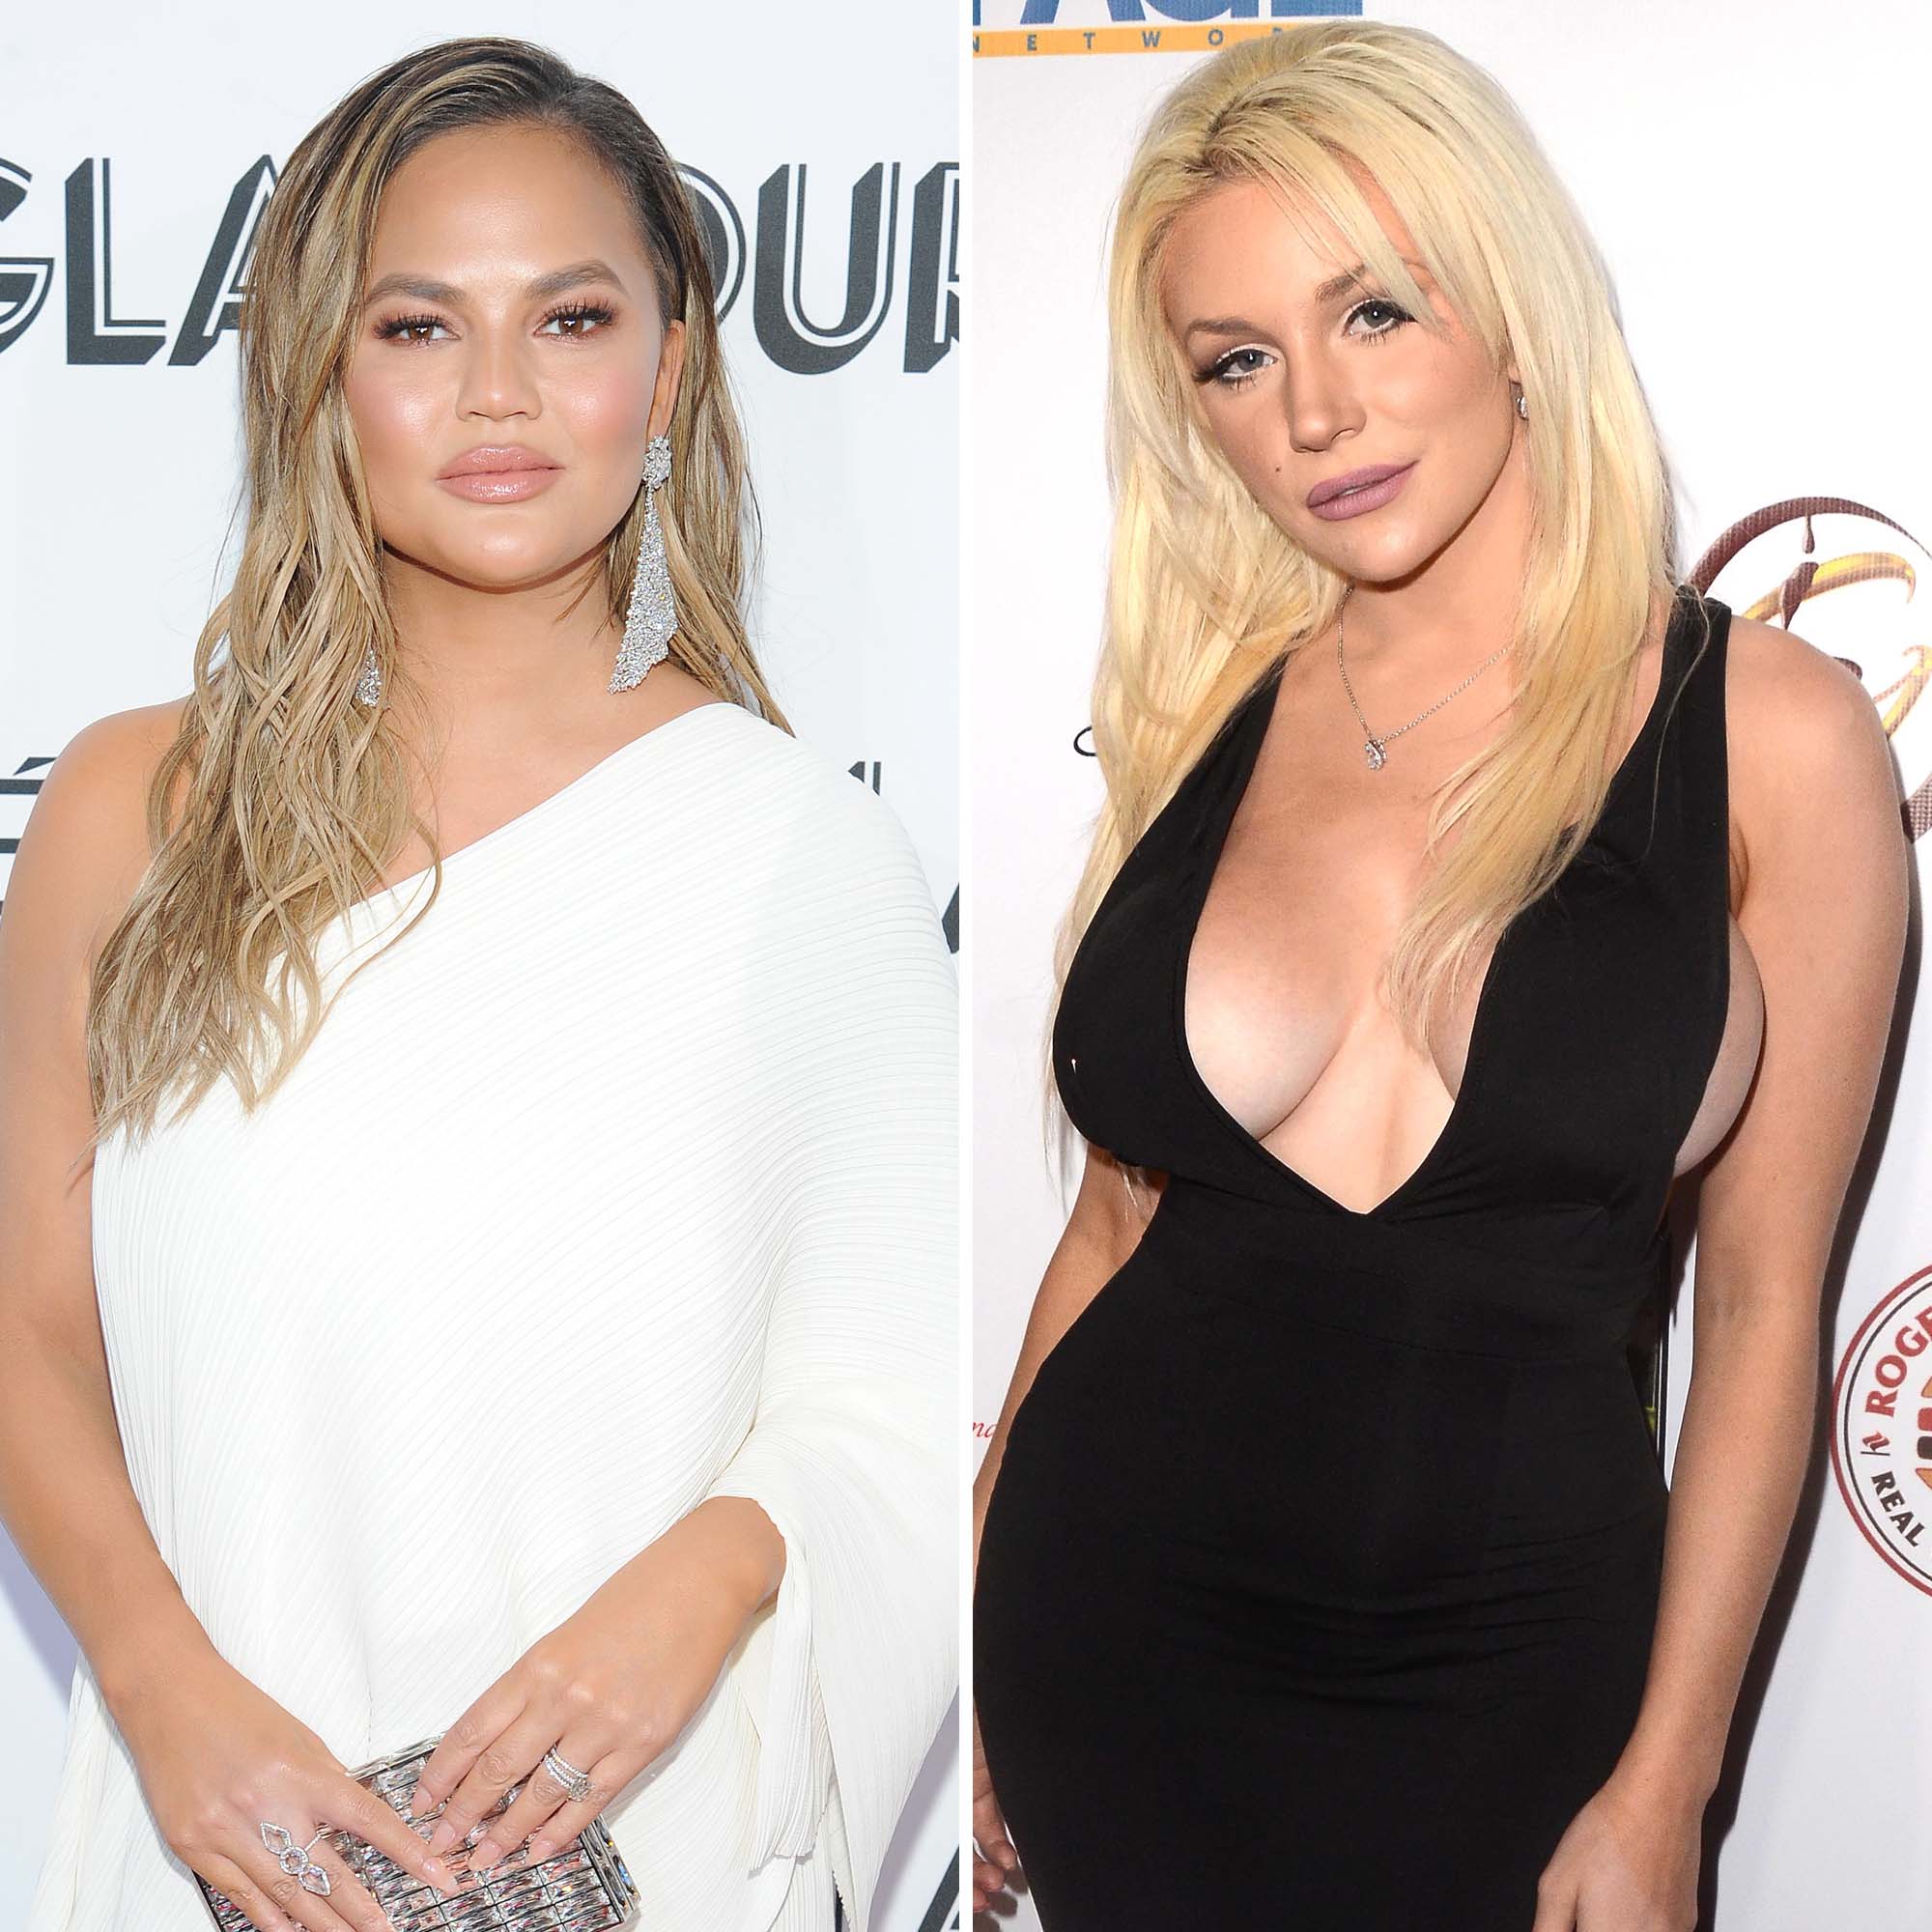 Chrissy Teigen Apologizes To Courtney Stodden For Past Comments